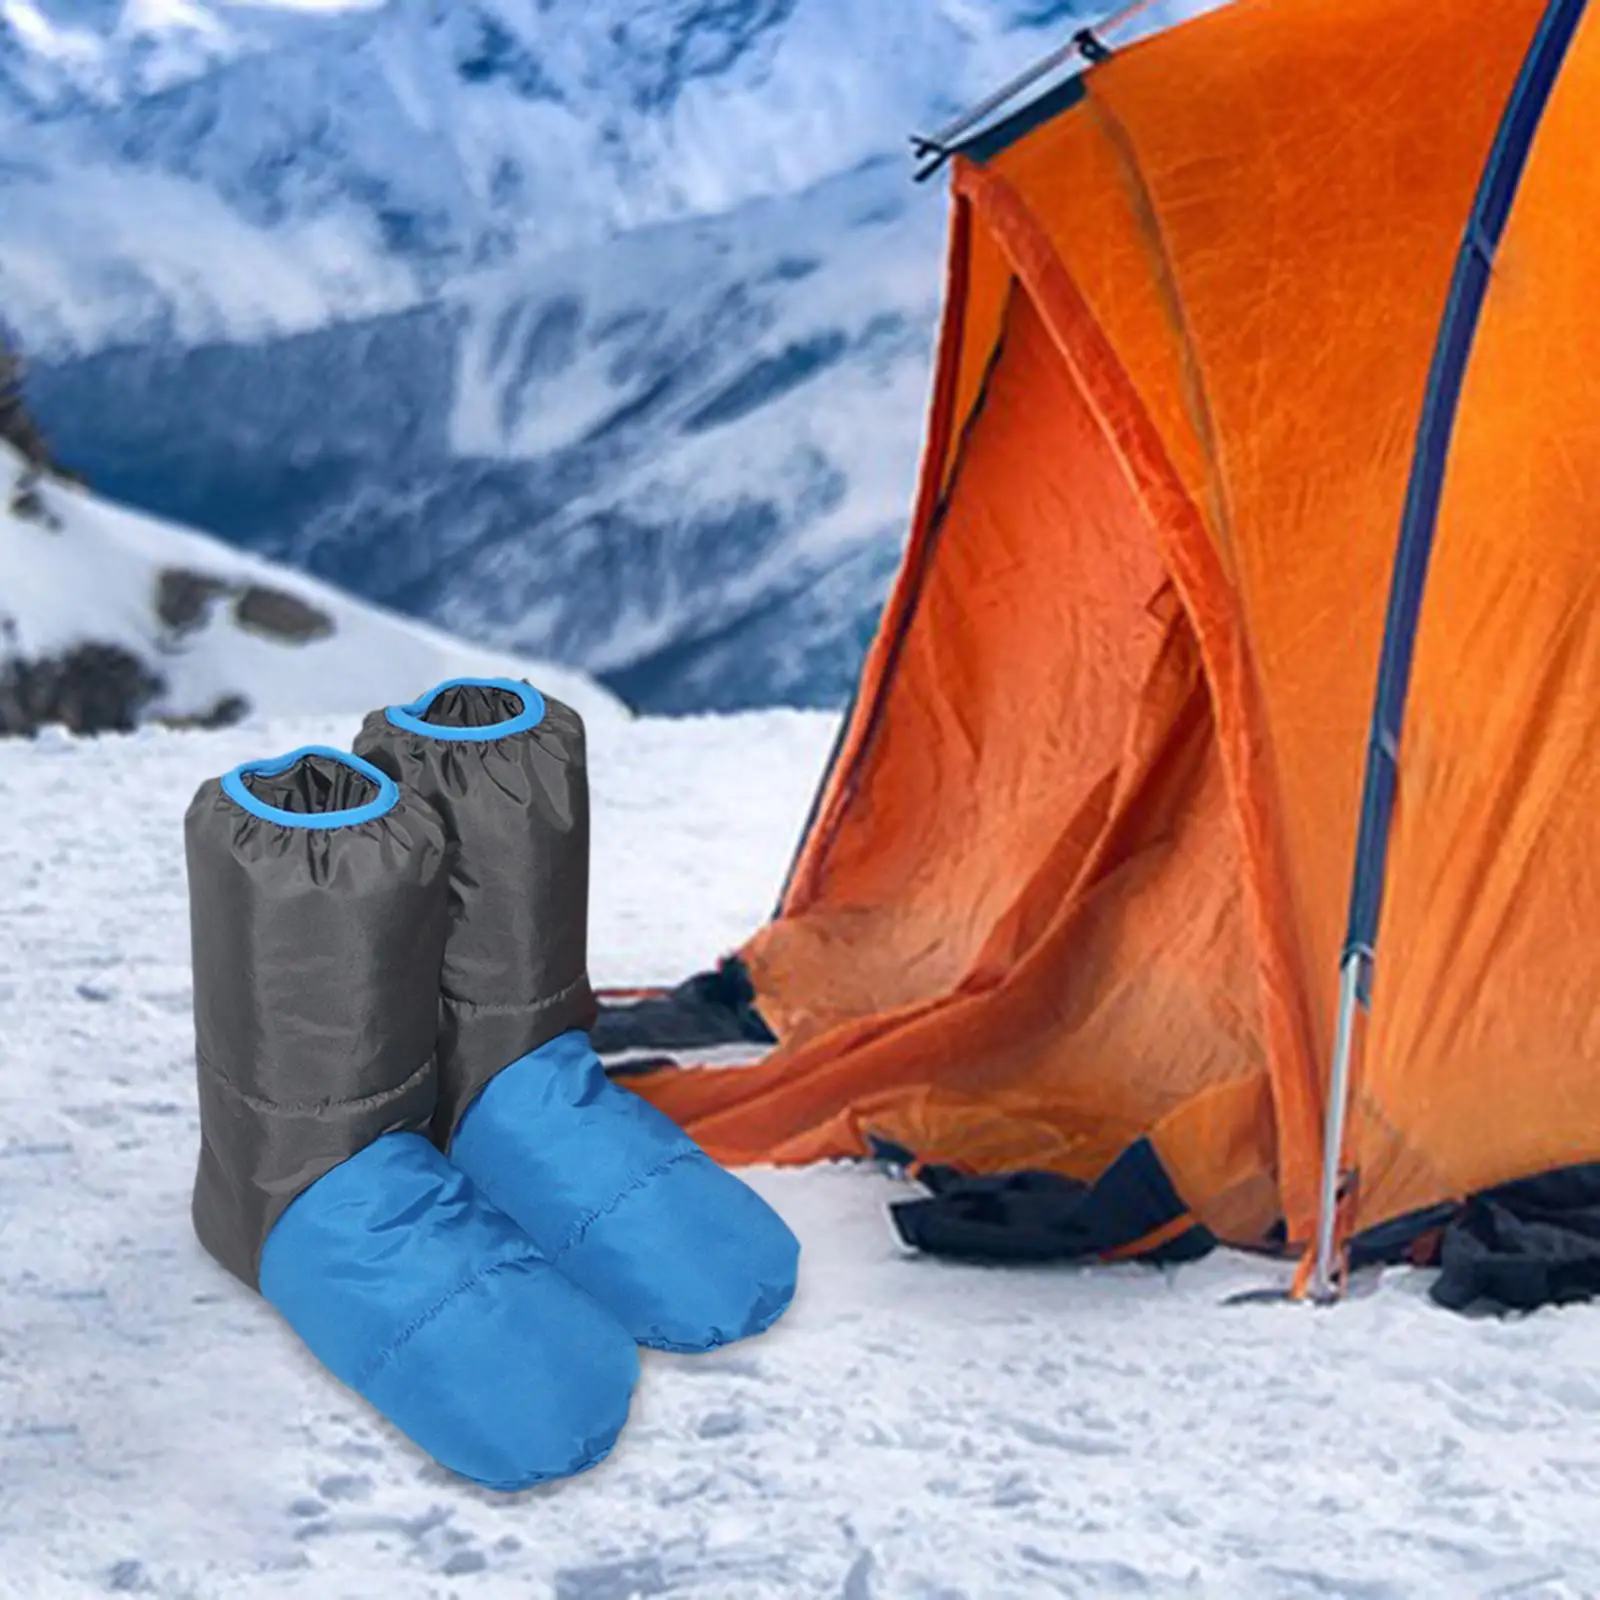 Down Booties Winter Shoes Foot Socks Windproof Down Slipper Boots for Camping Hiking Home Men Women Sleeping Bag Accessories